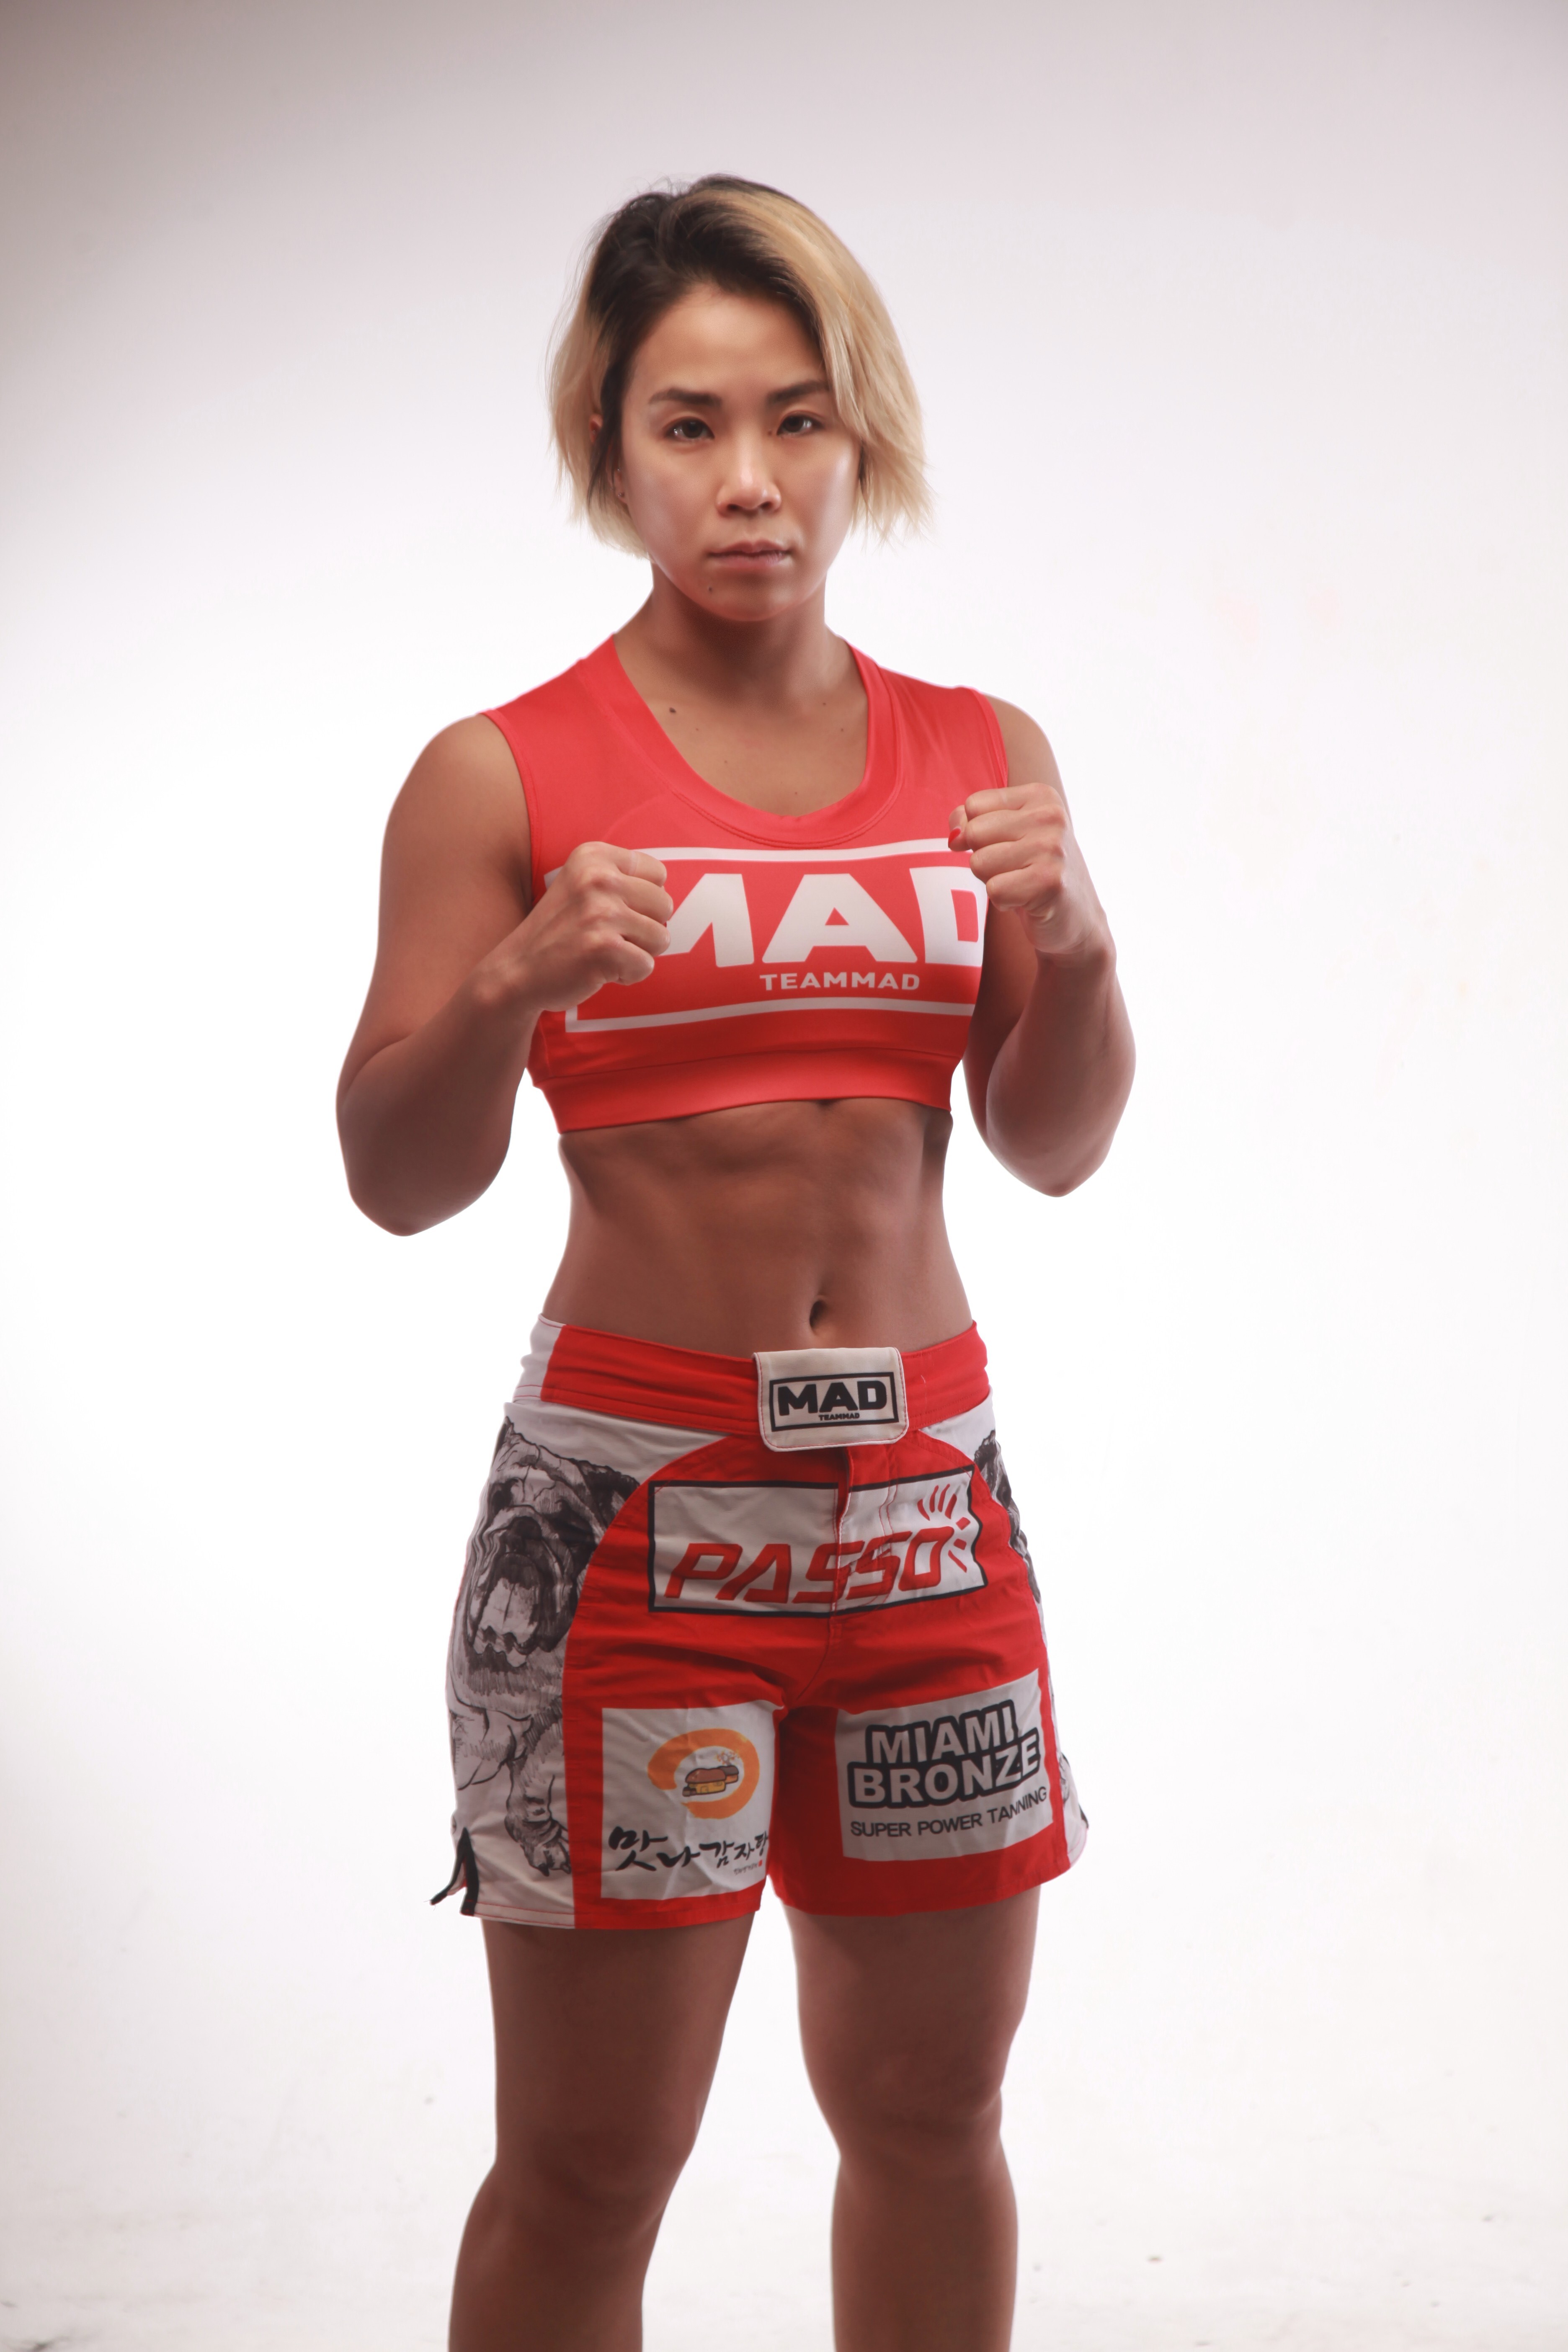 Ham Seo-hee is set for her ONE Championship debut at Empower. Photo: ONE Championship